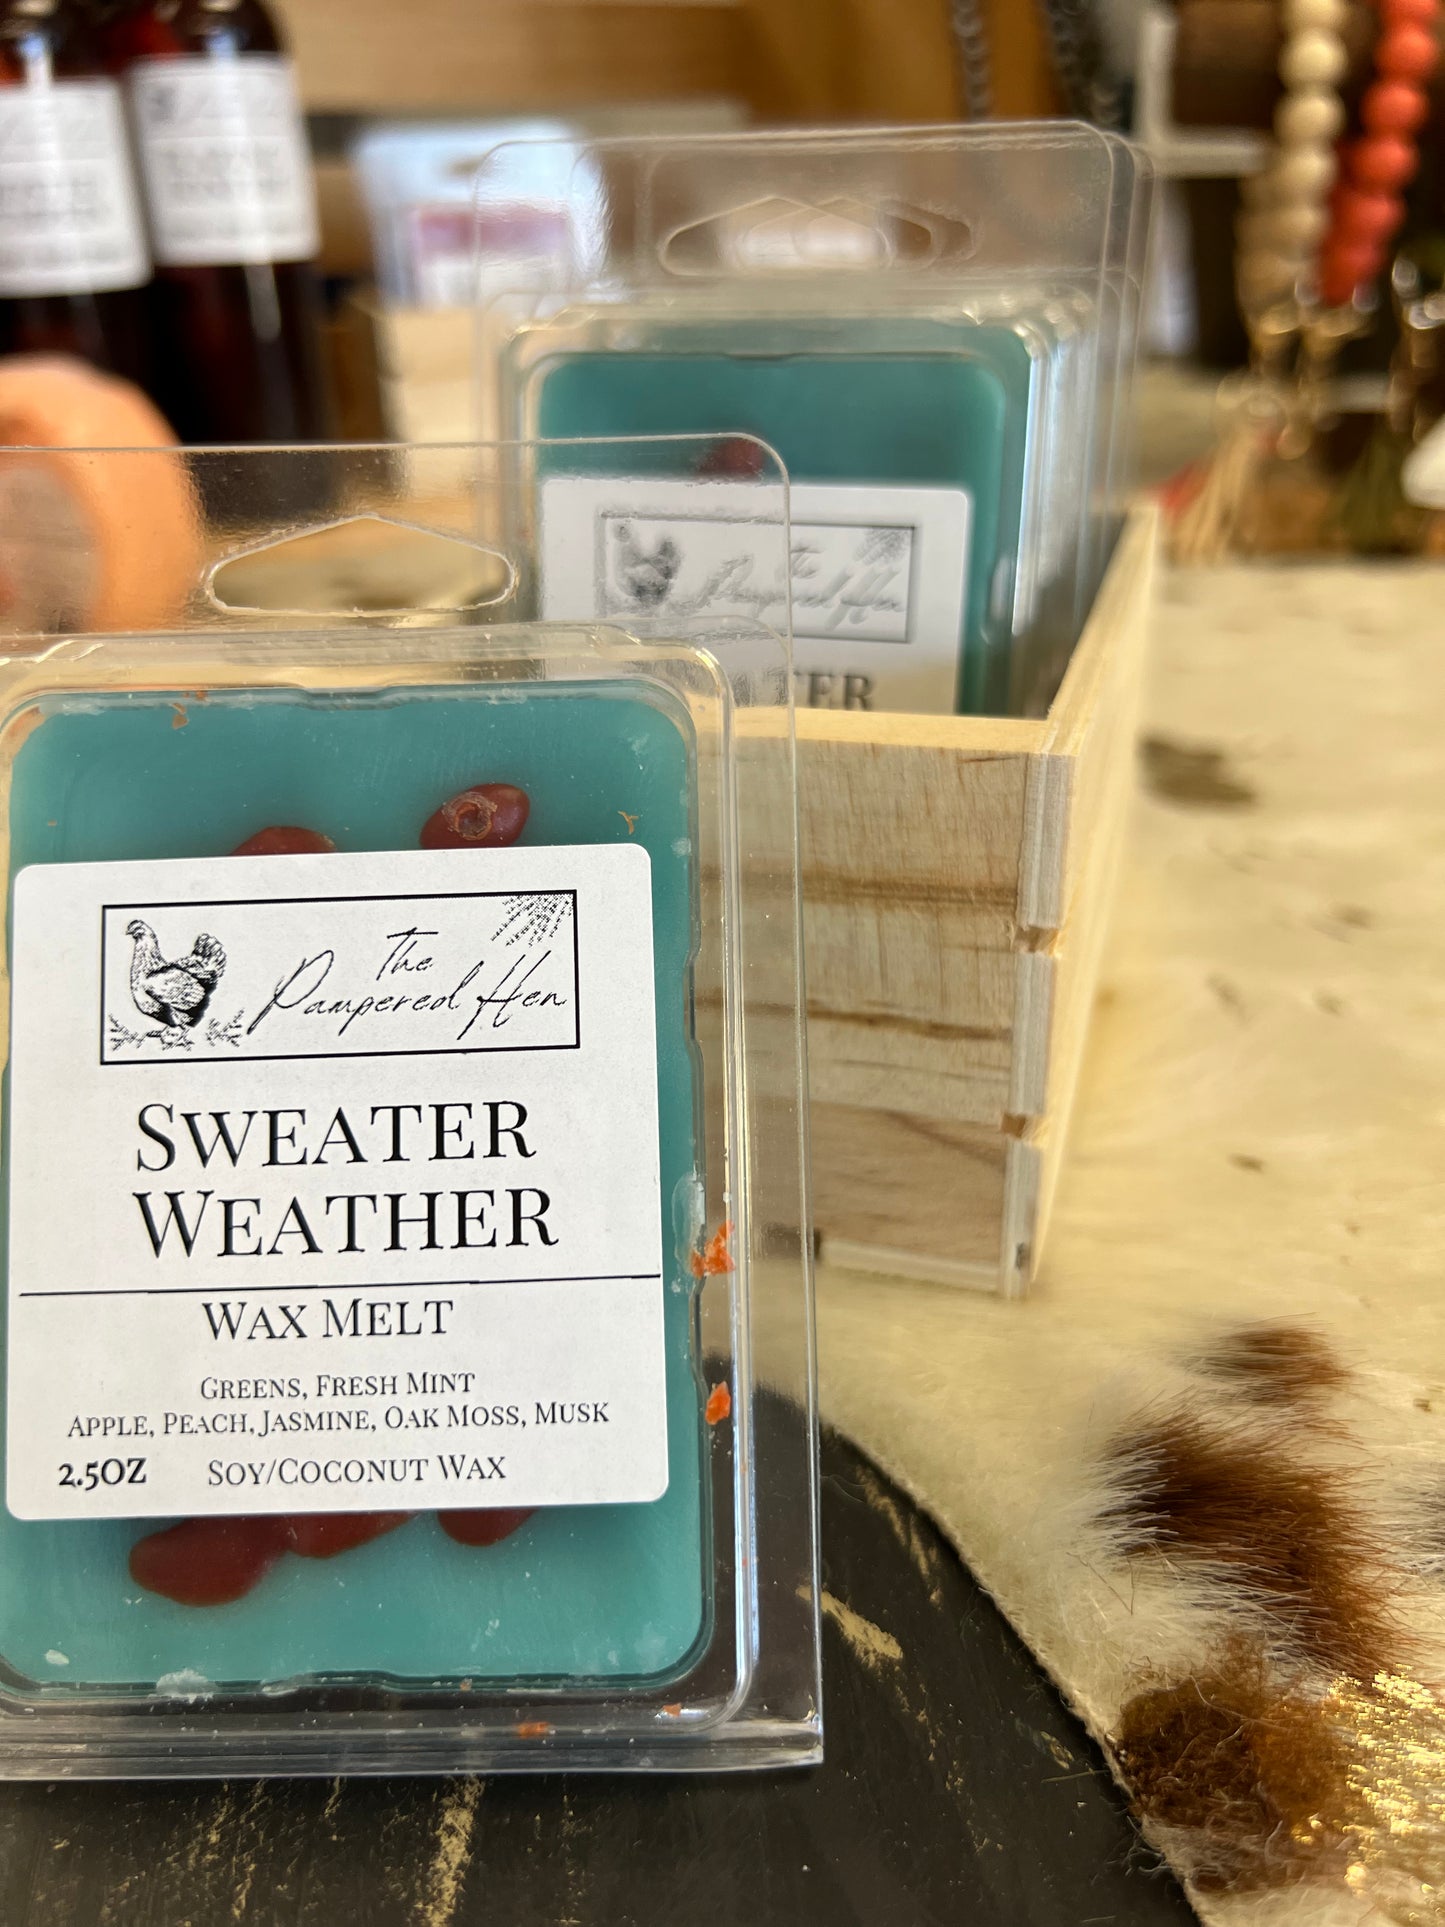 Sweater Weather Wax Melts